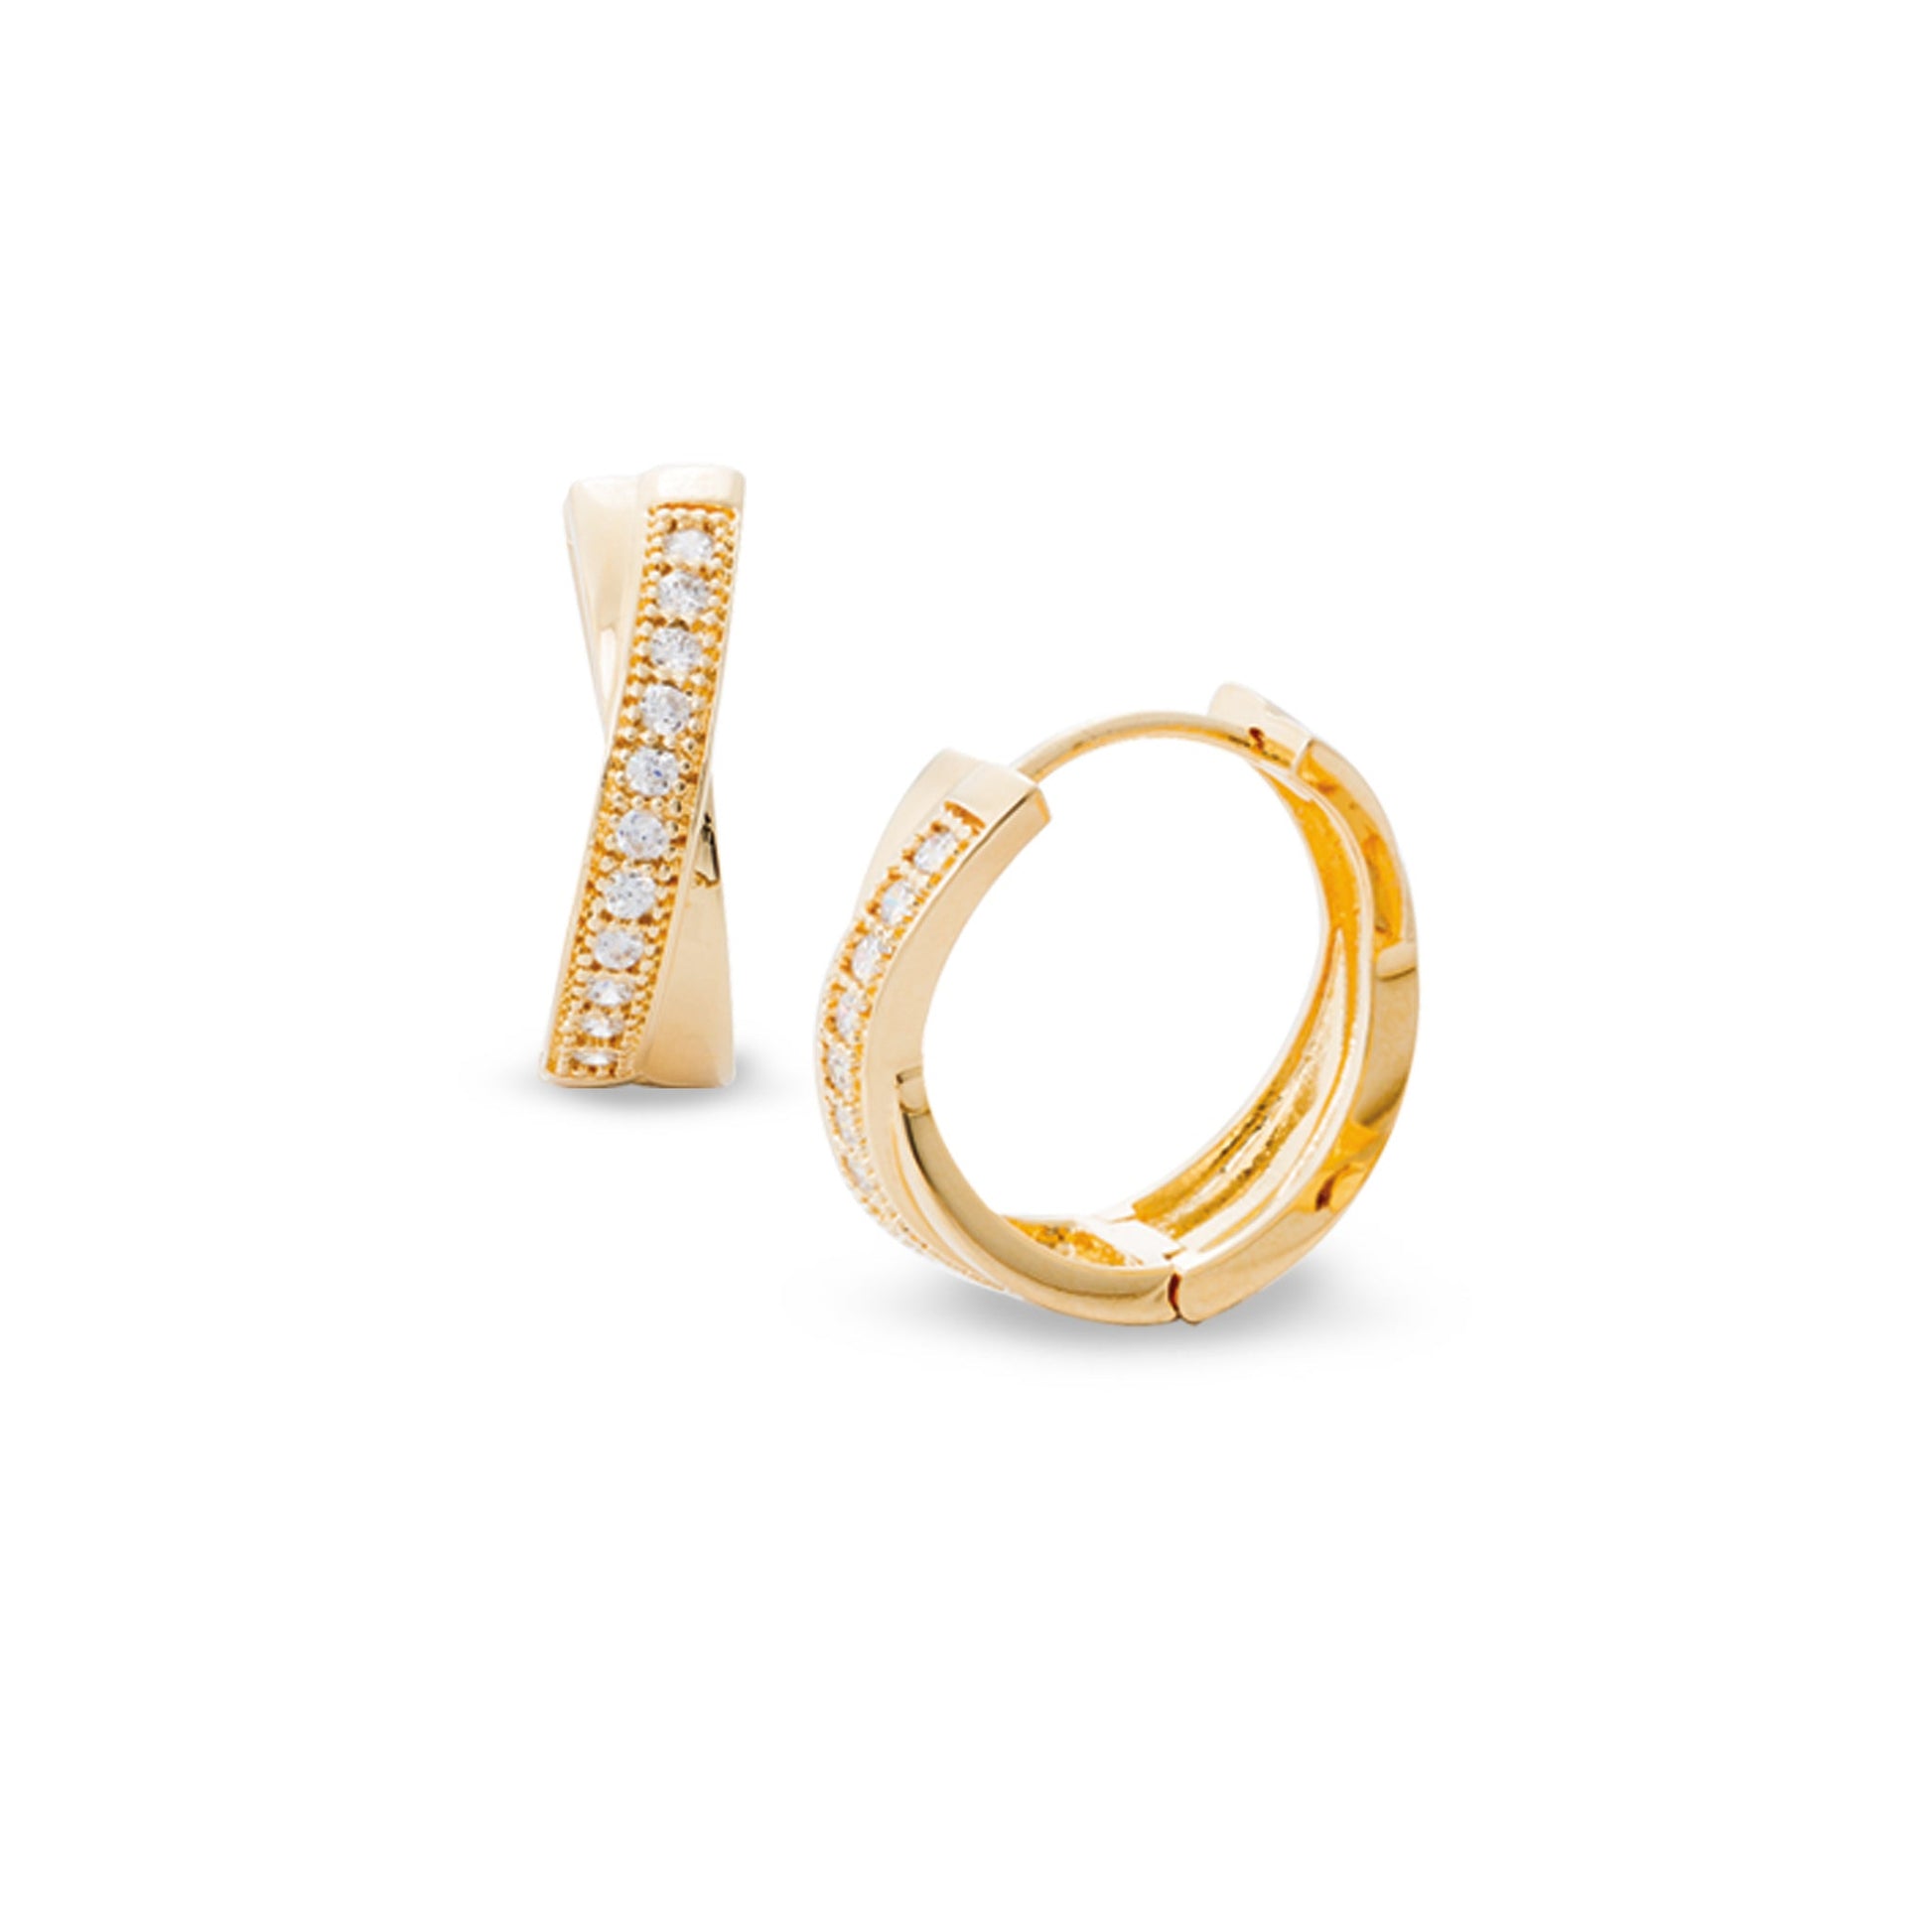 A criss cross huggie earrings with simulated diamonds displayed on a neutral white background.